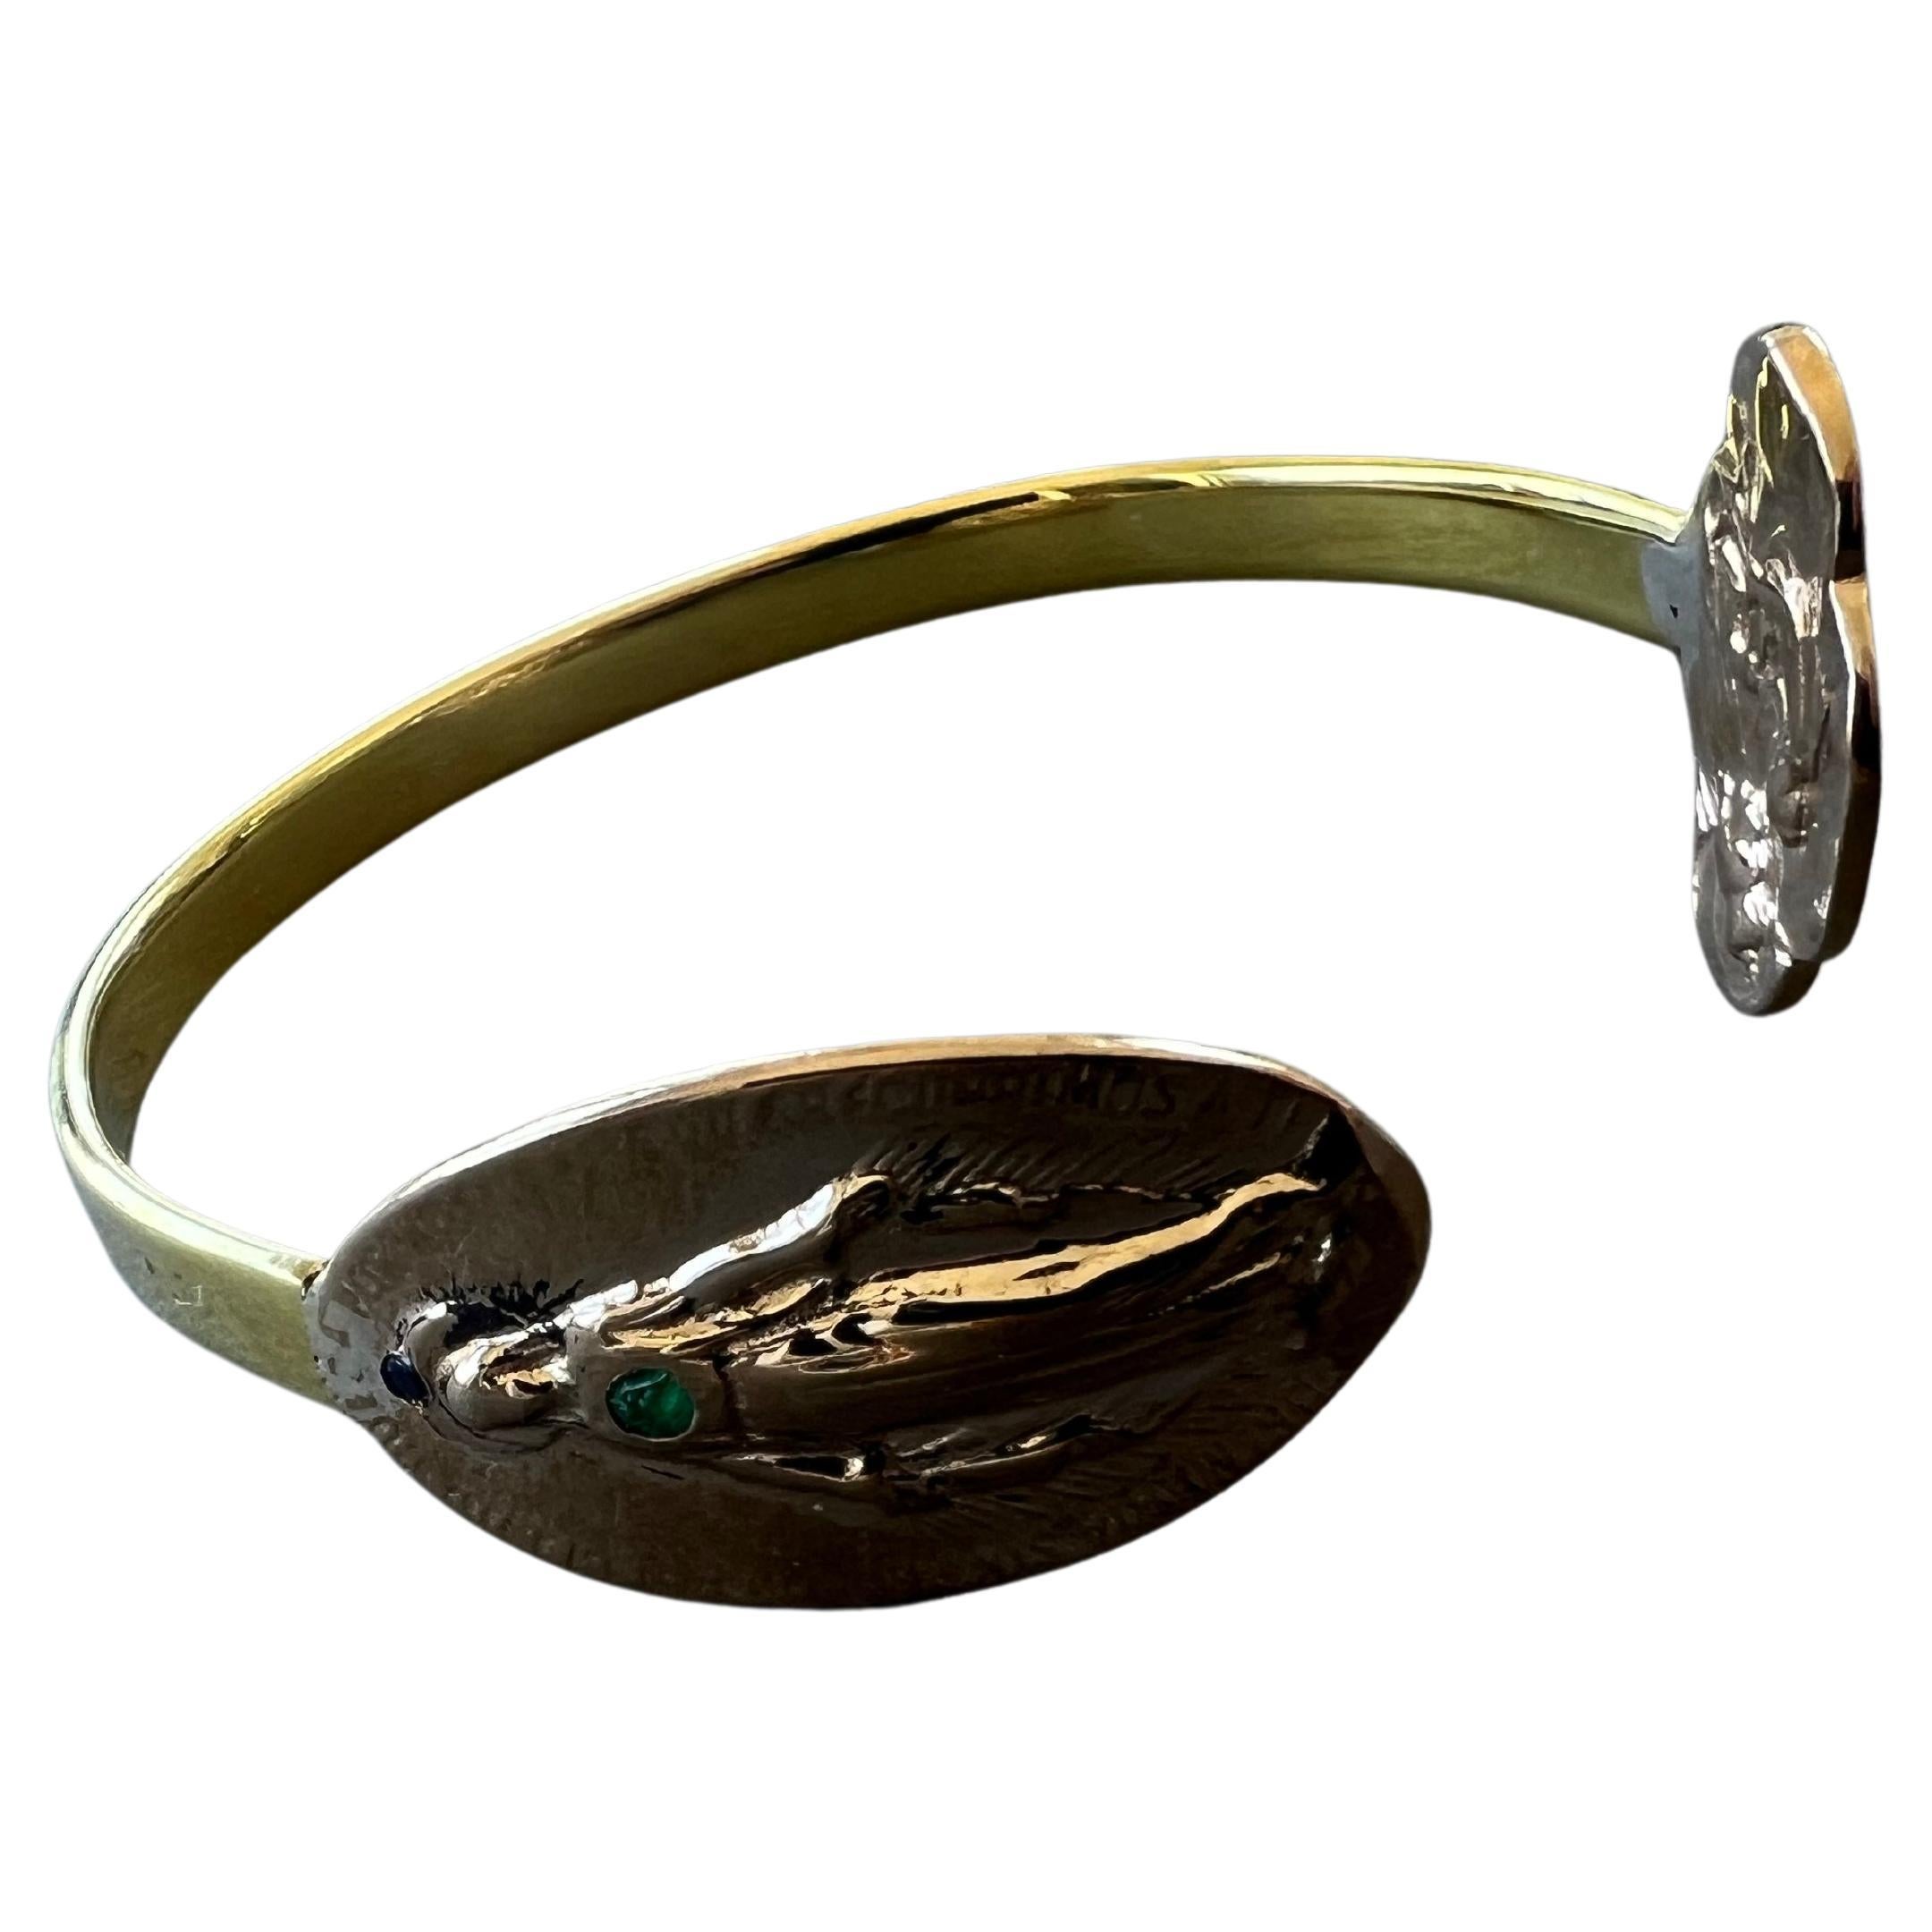 Emerald Virgin Mary Bangle Bracelet Cuff Spiritual Religious

This Emerald Virgin Mary Bangle Bracelet Cuff is a beautiful and meaningful piece of jewelry that combines fashion with spirituality. The cuff features a stunning Emerald centerpiece,